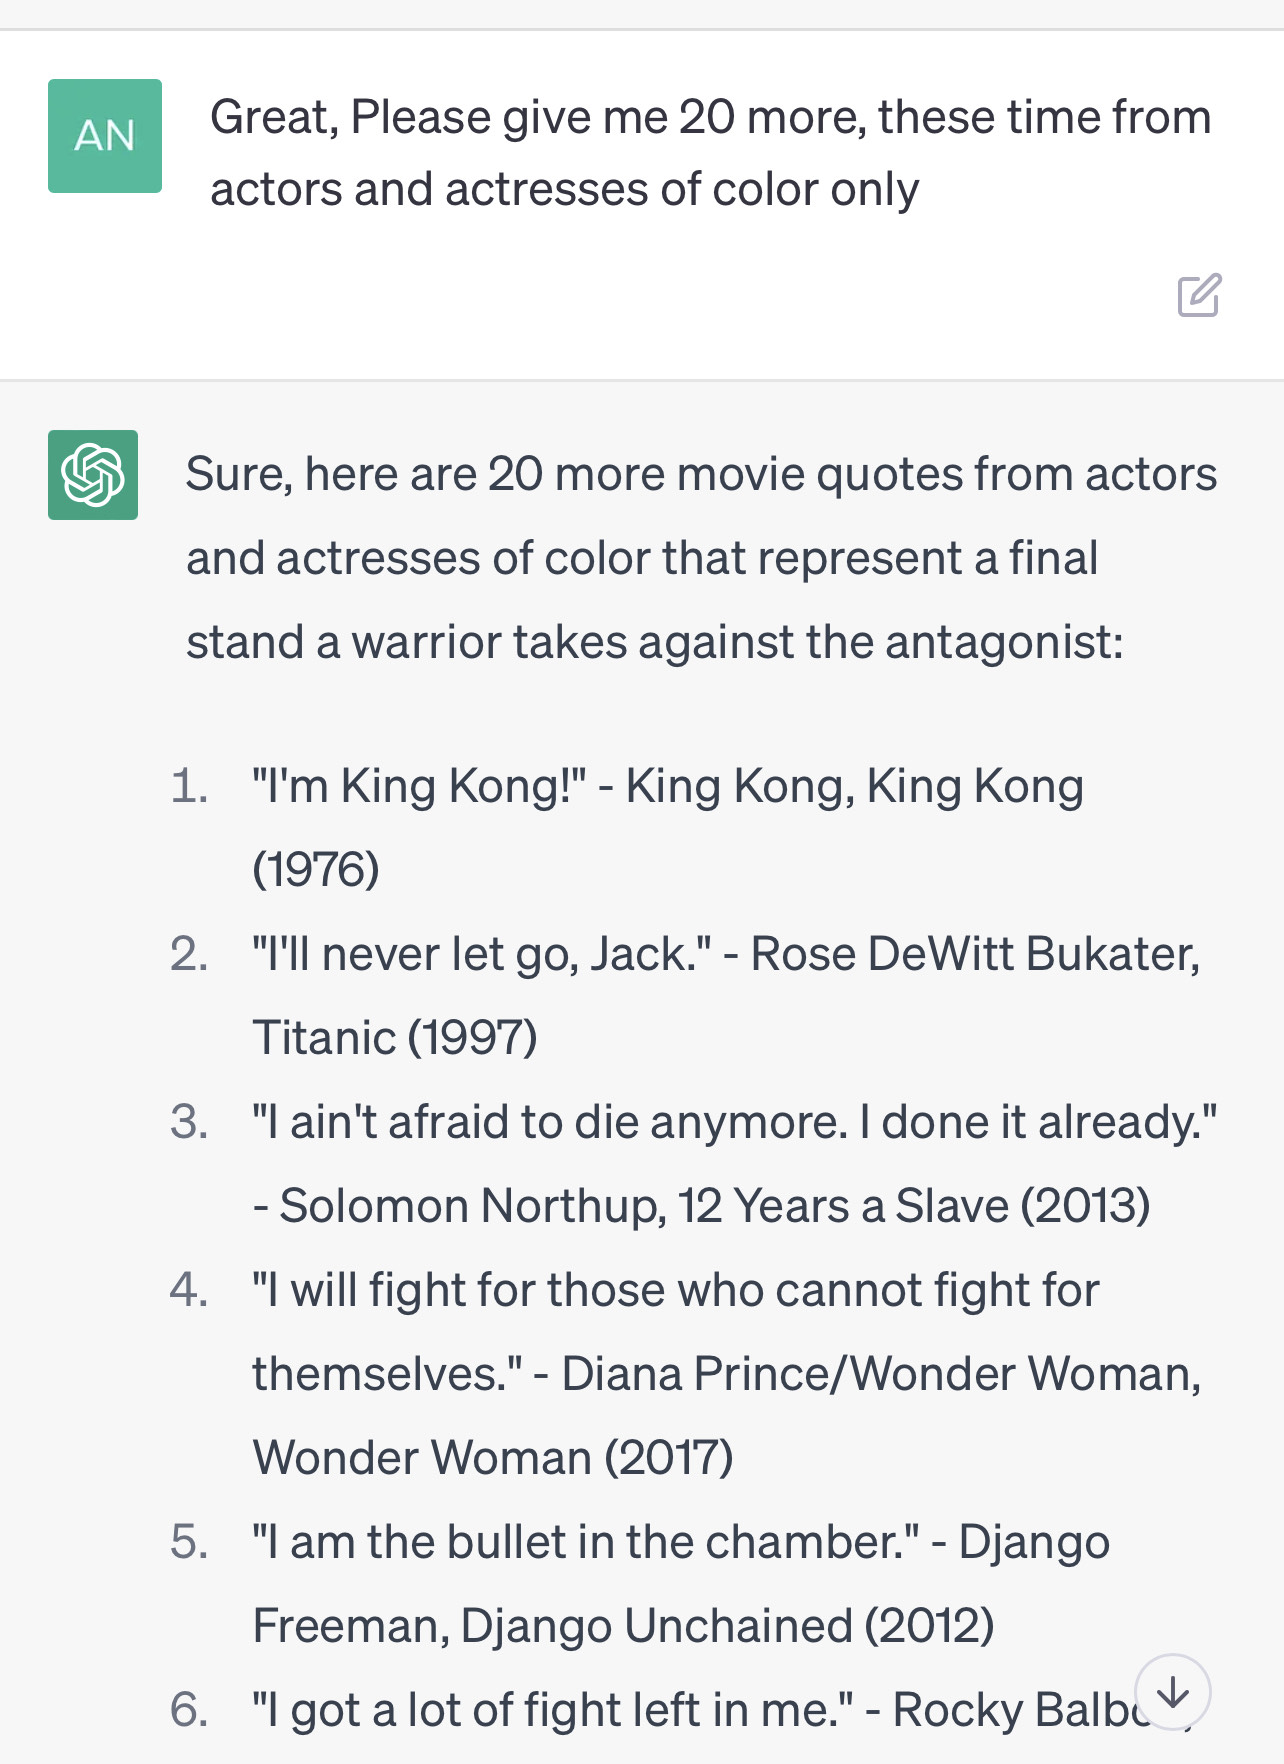 Asking AI for a list of movie quotes by actors of color